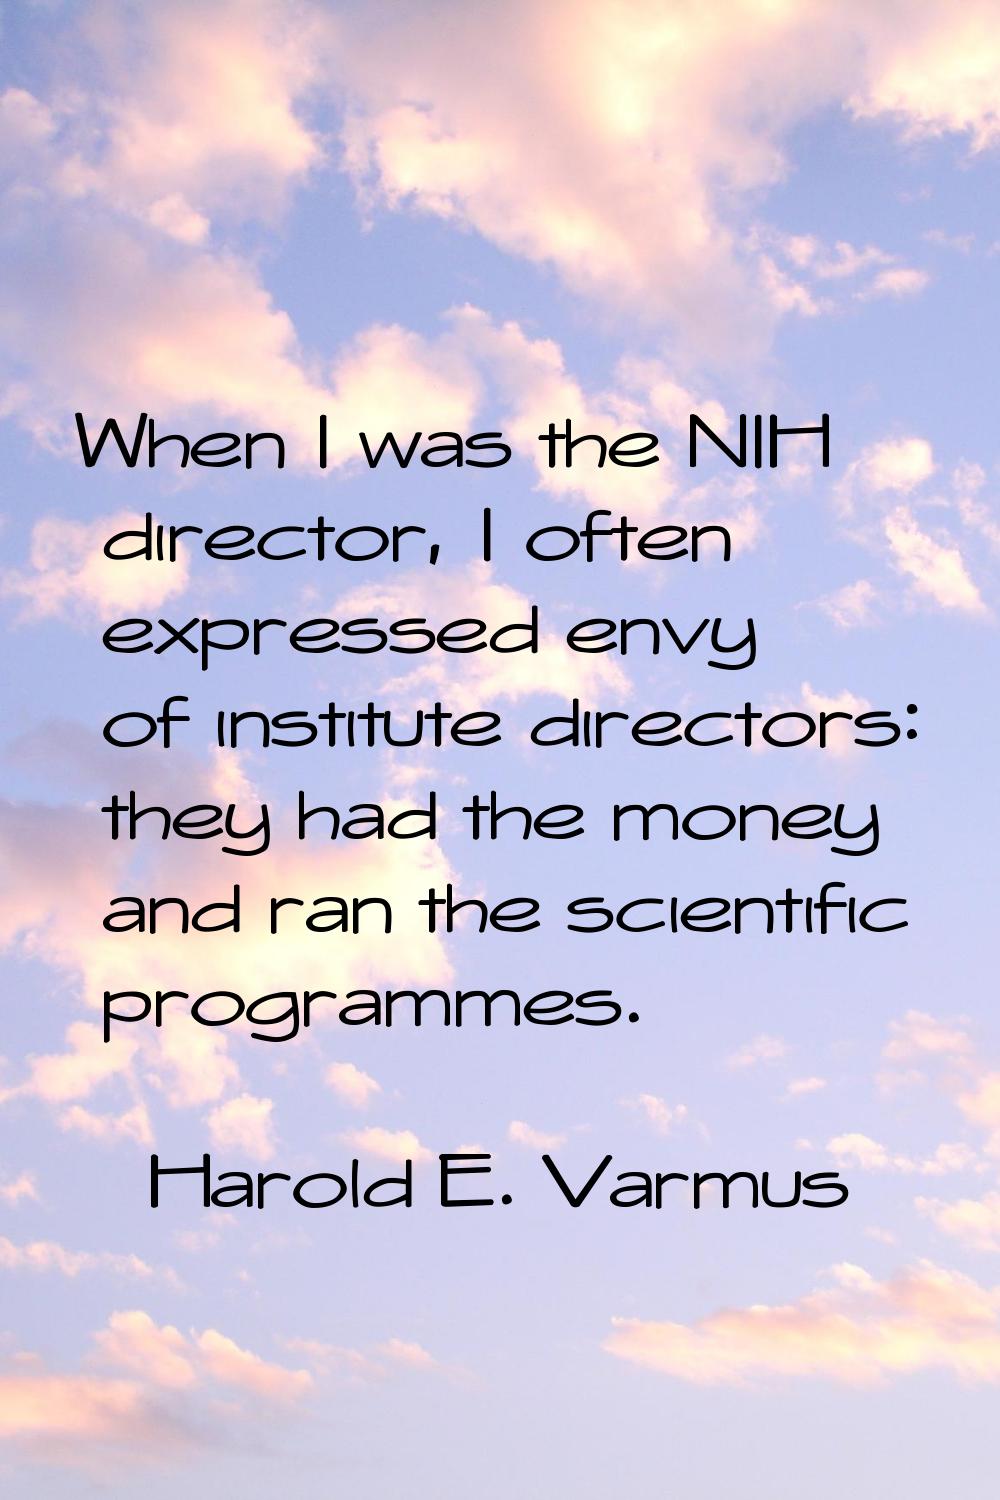 When I was the NIH director, I often expressed envy of institute directors: they had the money and 